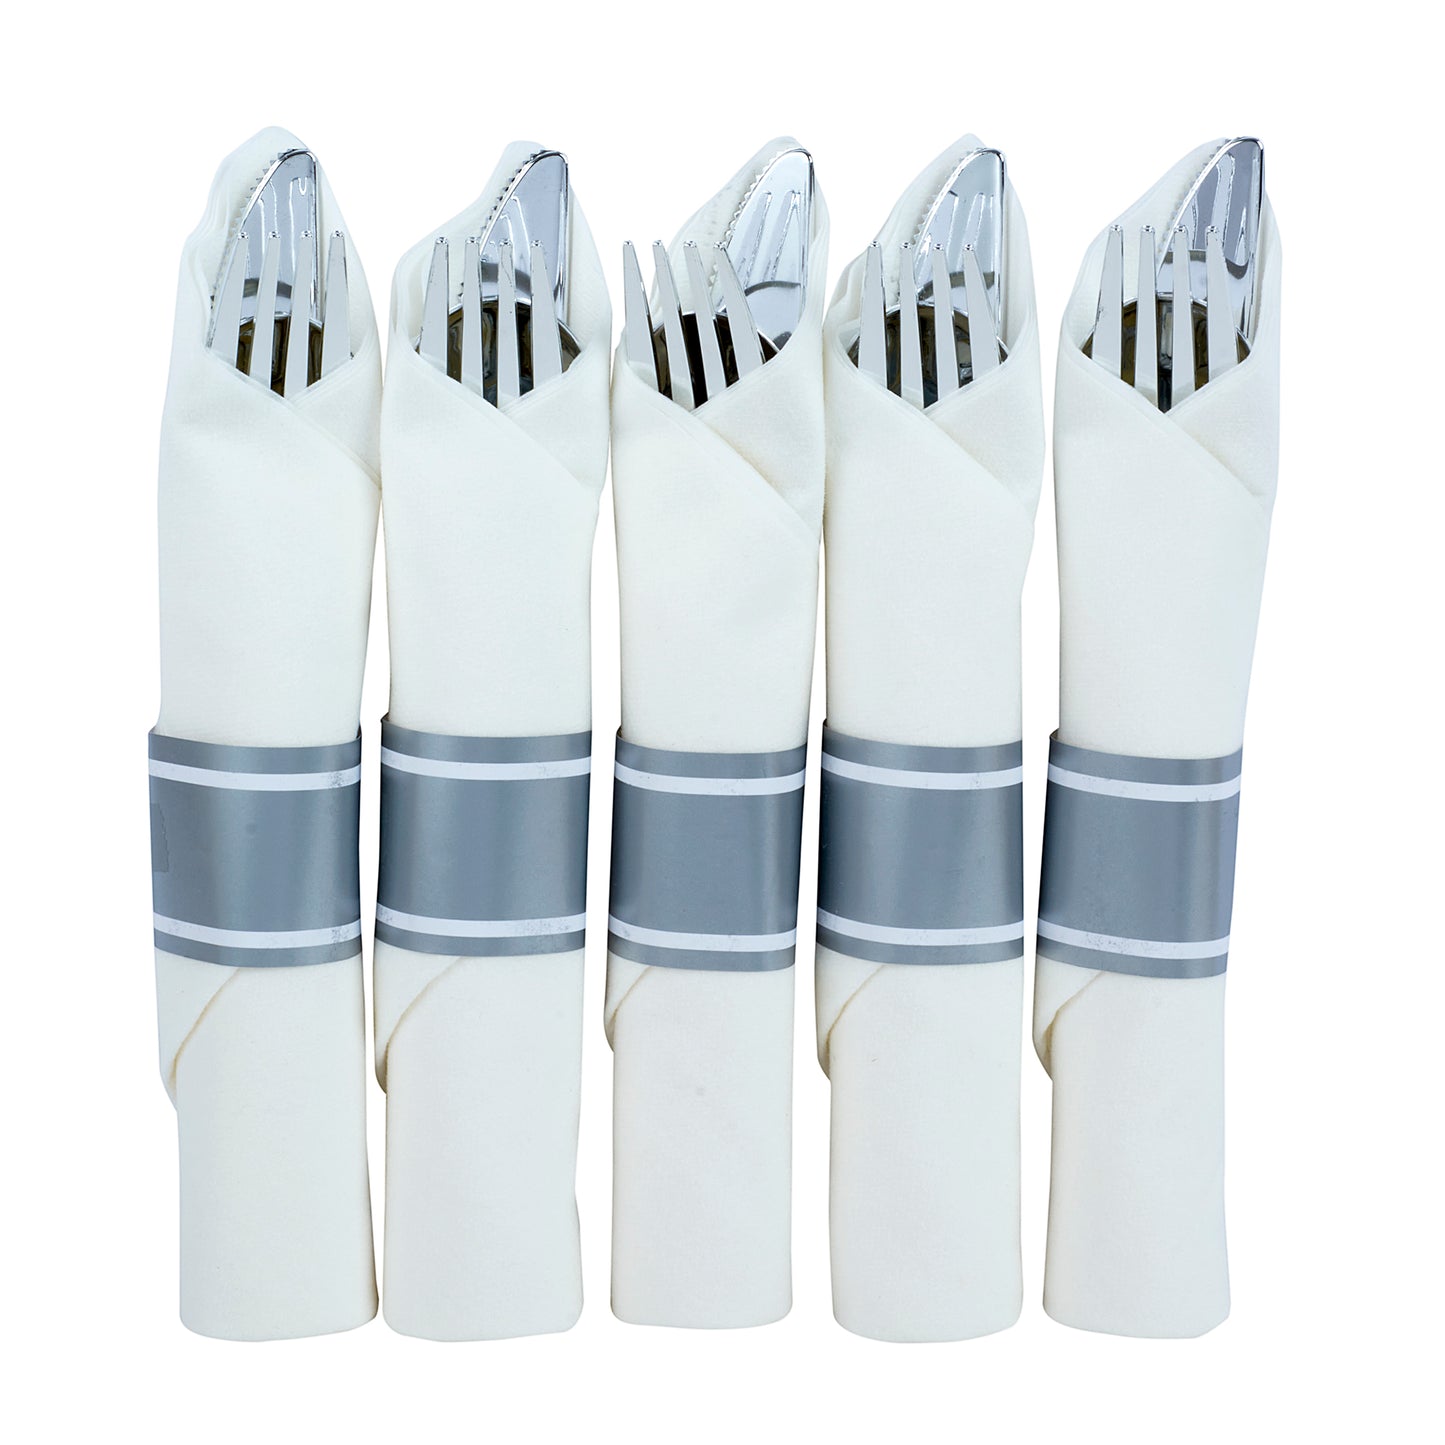 200 piece pre-rolled silver-colored plastic silverware set for 50 guests, each napkin pack includes 1 fork, 1 knife, and 1 spoon wrapped inside